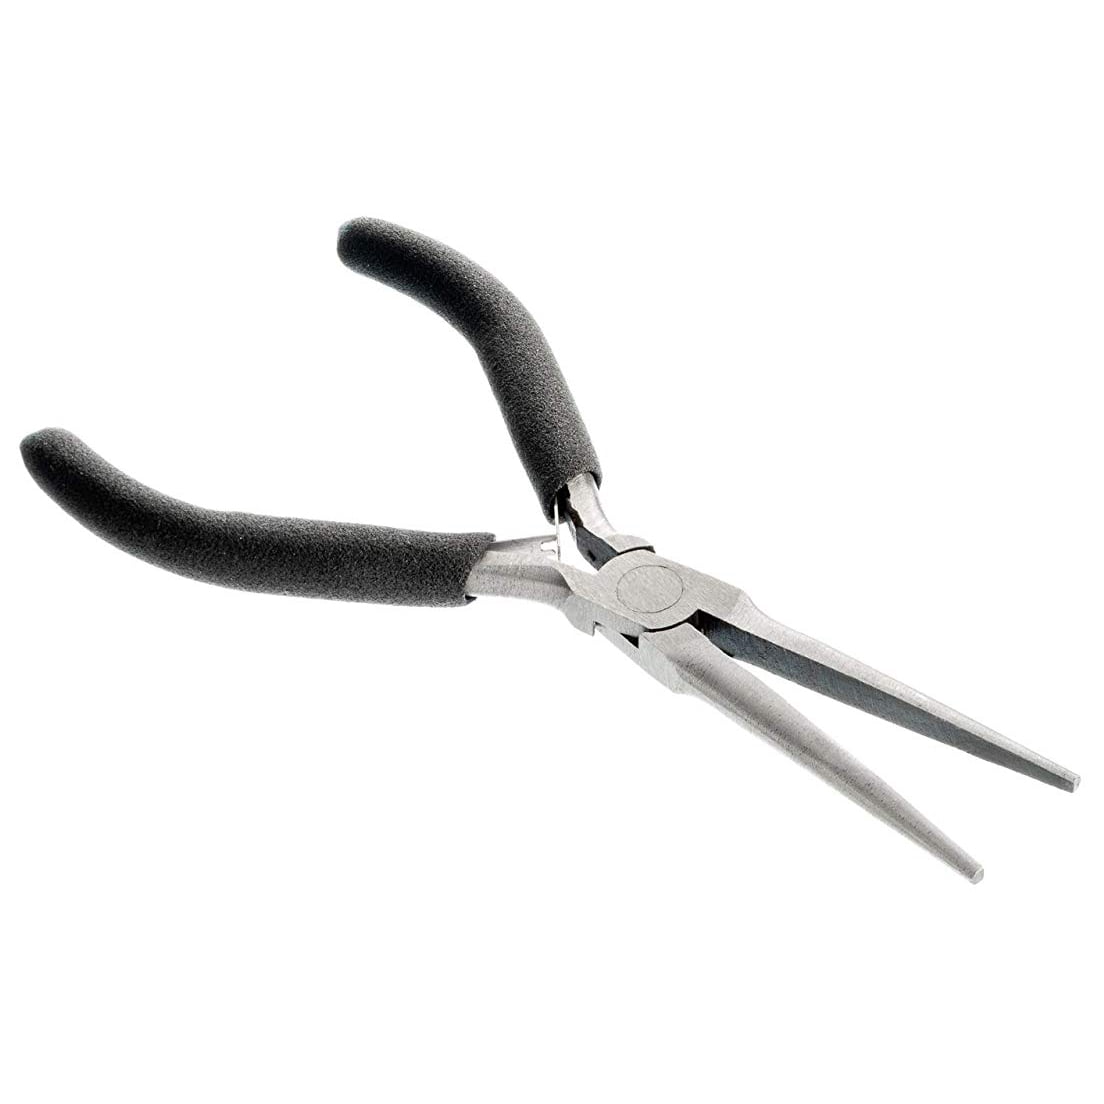 FUNSUEI 3 Pack 11 Inch Long Reach Nose Pliers, Straight Long Nose Pliers  with PVC Handle, Serrated Jaws Steel Long Needle Nose Pliers for Mechanics,  Technicians, DIY'ers, for Hard-to-Reach Pieces - Yahoo